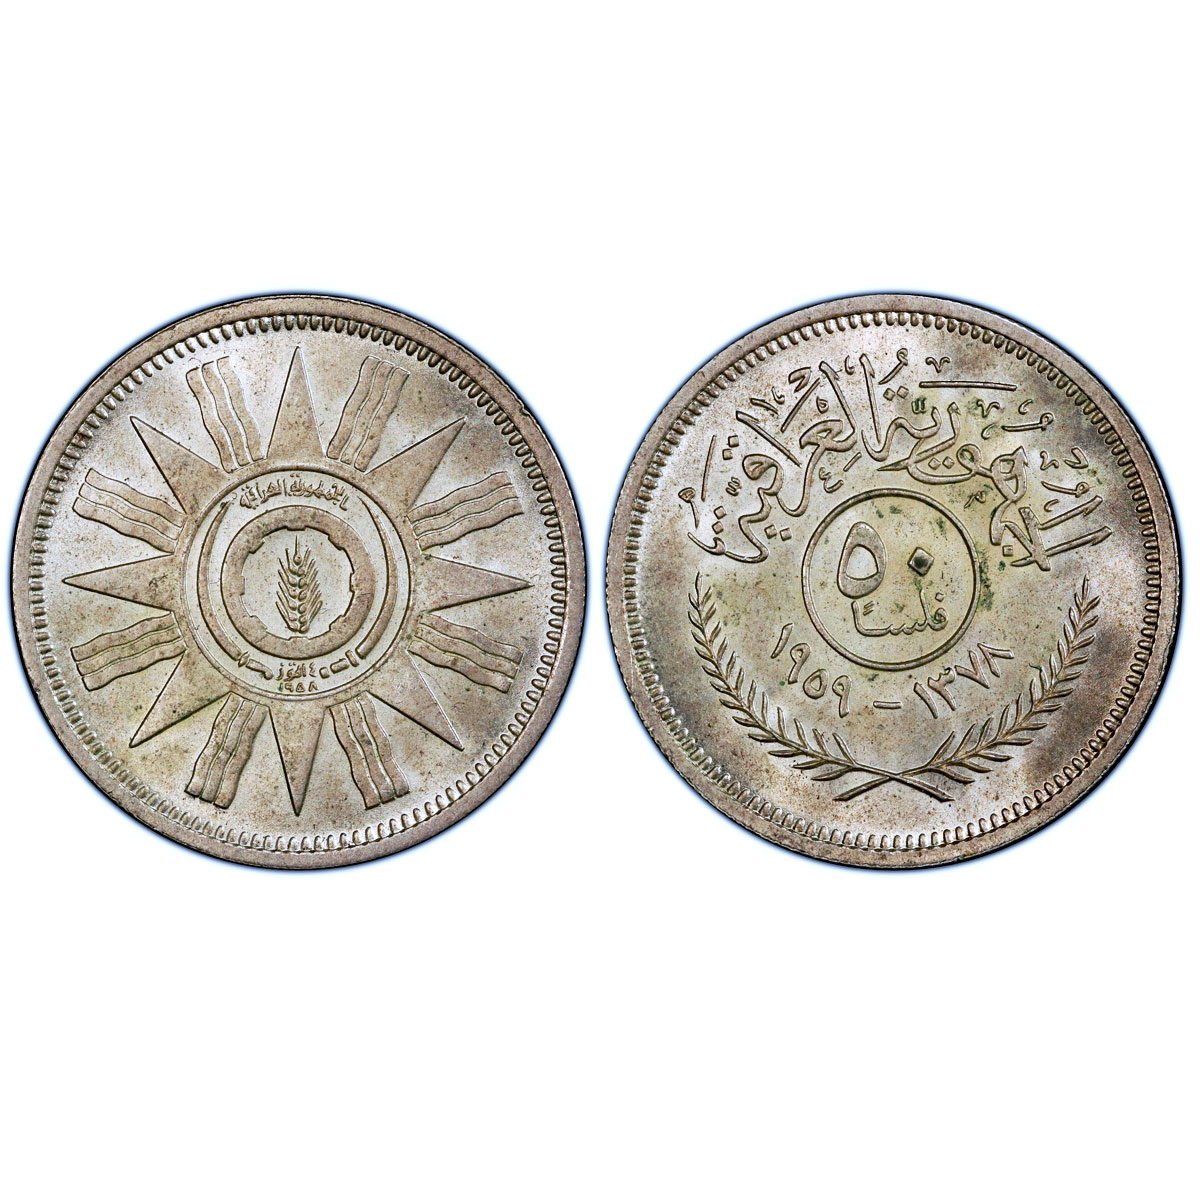 Iraq 50 fils State Coinage Coat of Arms Sun Emblem MS64 PCGS silver coin 1959